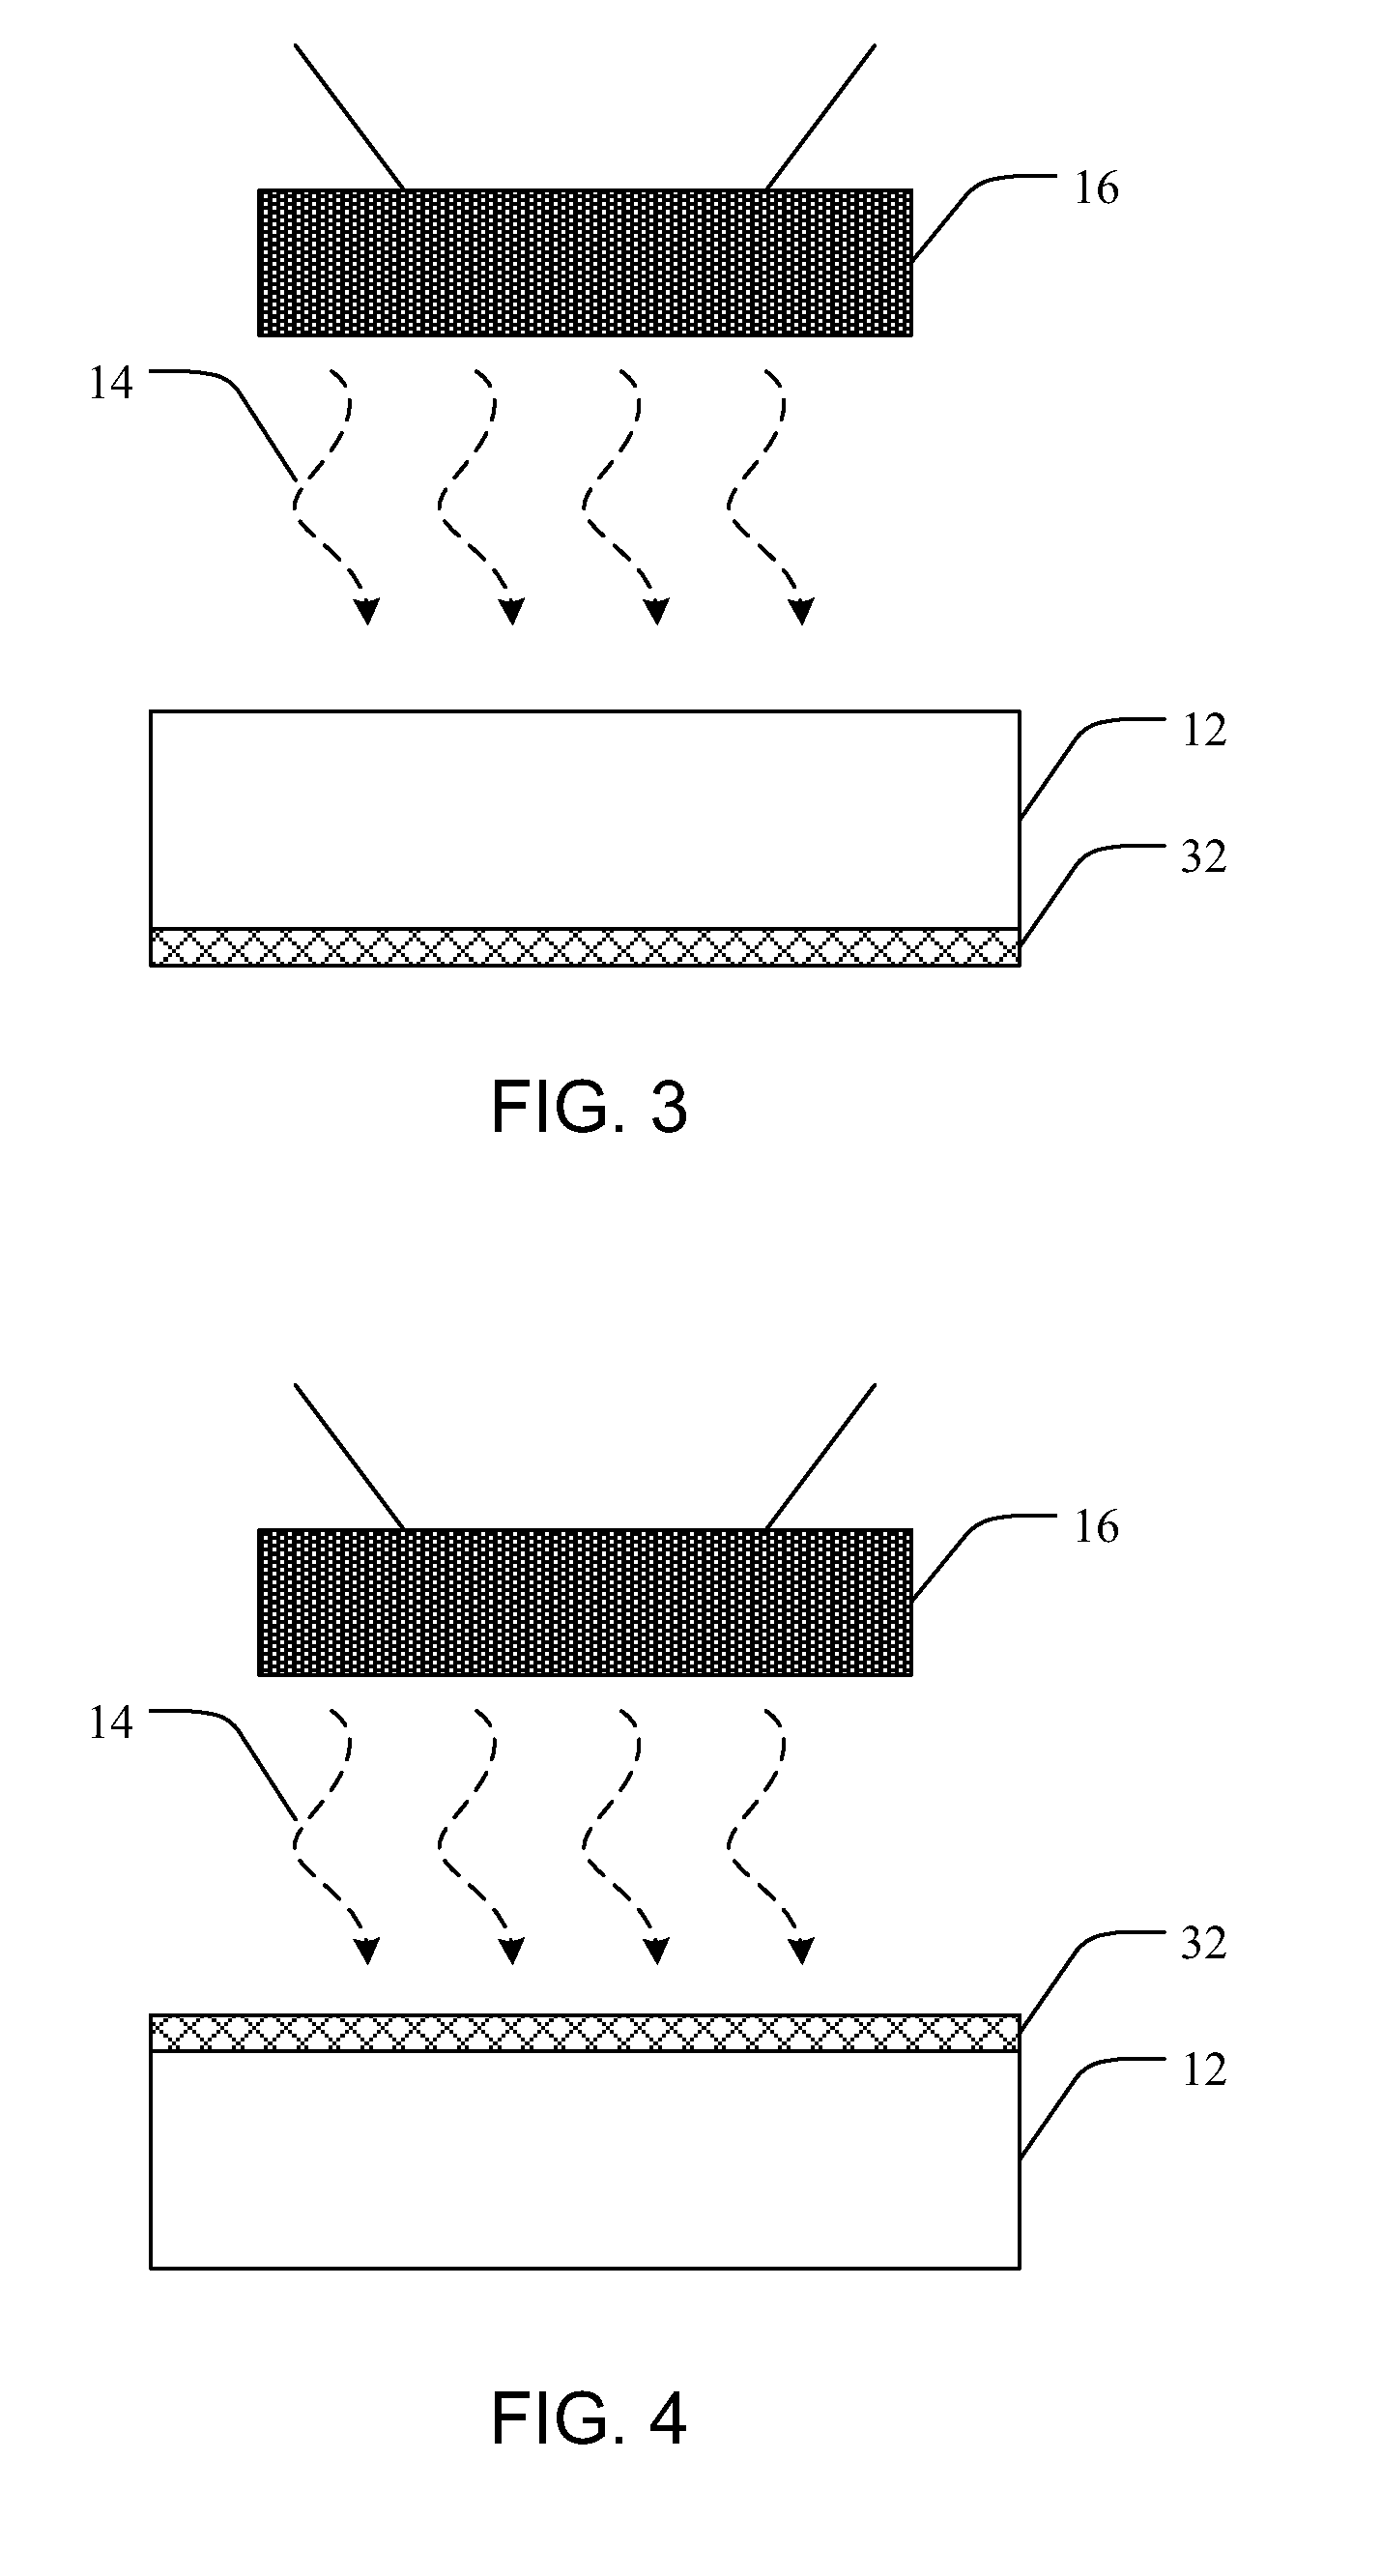 Electromagnetic radiation imaging devices and associated methods